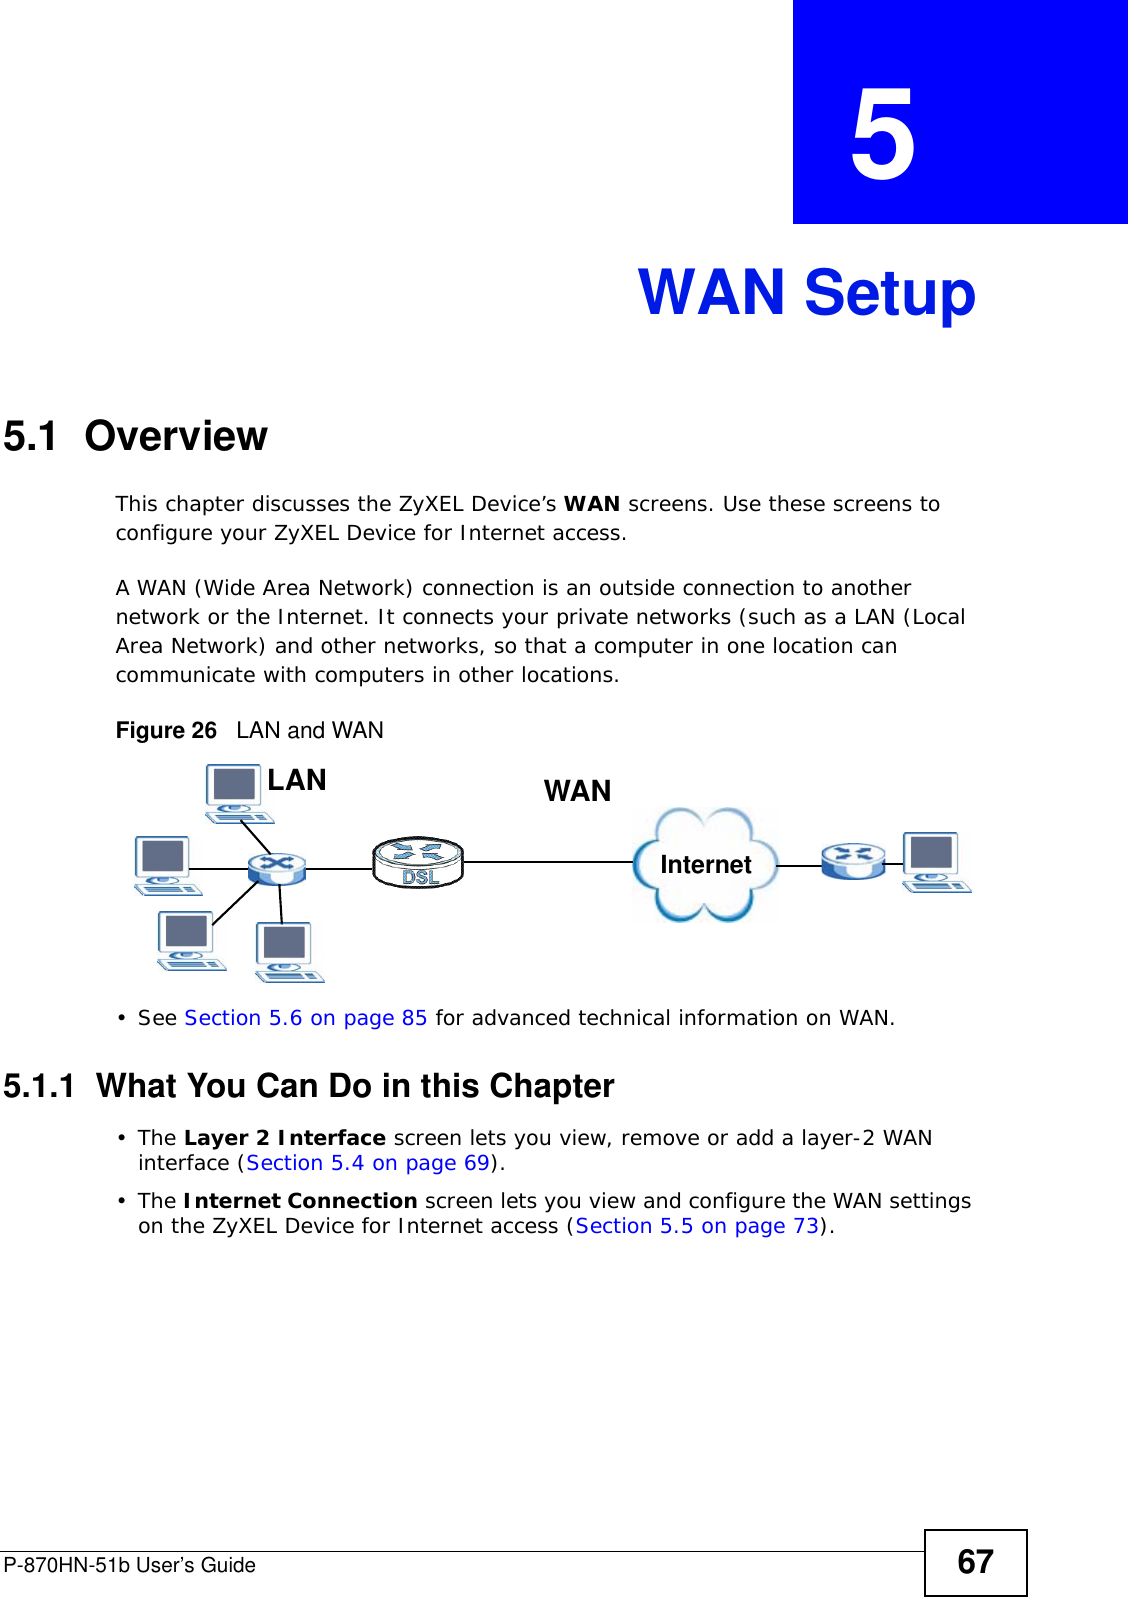 P-870HN-51b User’s Guide 67CHAPTER  5 WAN Setup5.1  OverviewThis chapter discusses the ZyXEL Device’s WAN screens. Use these screens to configure your ZyXEL Device for Internet access.A WAN (Wide Area Network) connection is an outside connection to another network or the Internet. It connects your private networks (such as a LAN (Local Area Network) and other networks, so that a computer in one location can communicate with computers in other locations.Figure 26   LAN and WAN• See Section 5.6 on page 85 for advanced technical information on WAN.5.1.1  What You Can Do in this Chapter•The Layer 2 Interface screen lets you view, remove or add a layer-2 WAN  interface (Section 5.4 on page 69).•The Internet Connection screen lets you view and configure the WAN settings on the ZyXEL Device for Internet access (Section 5.5 on page 73).InternetWANLAN